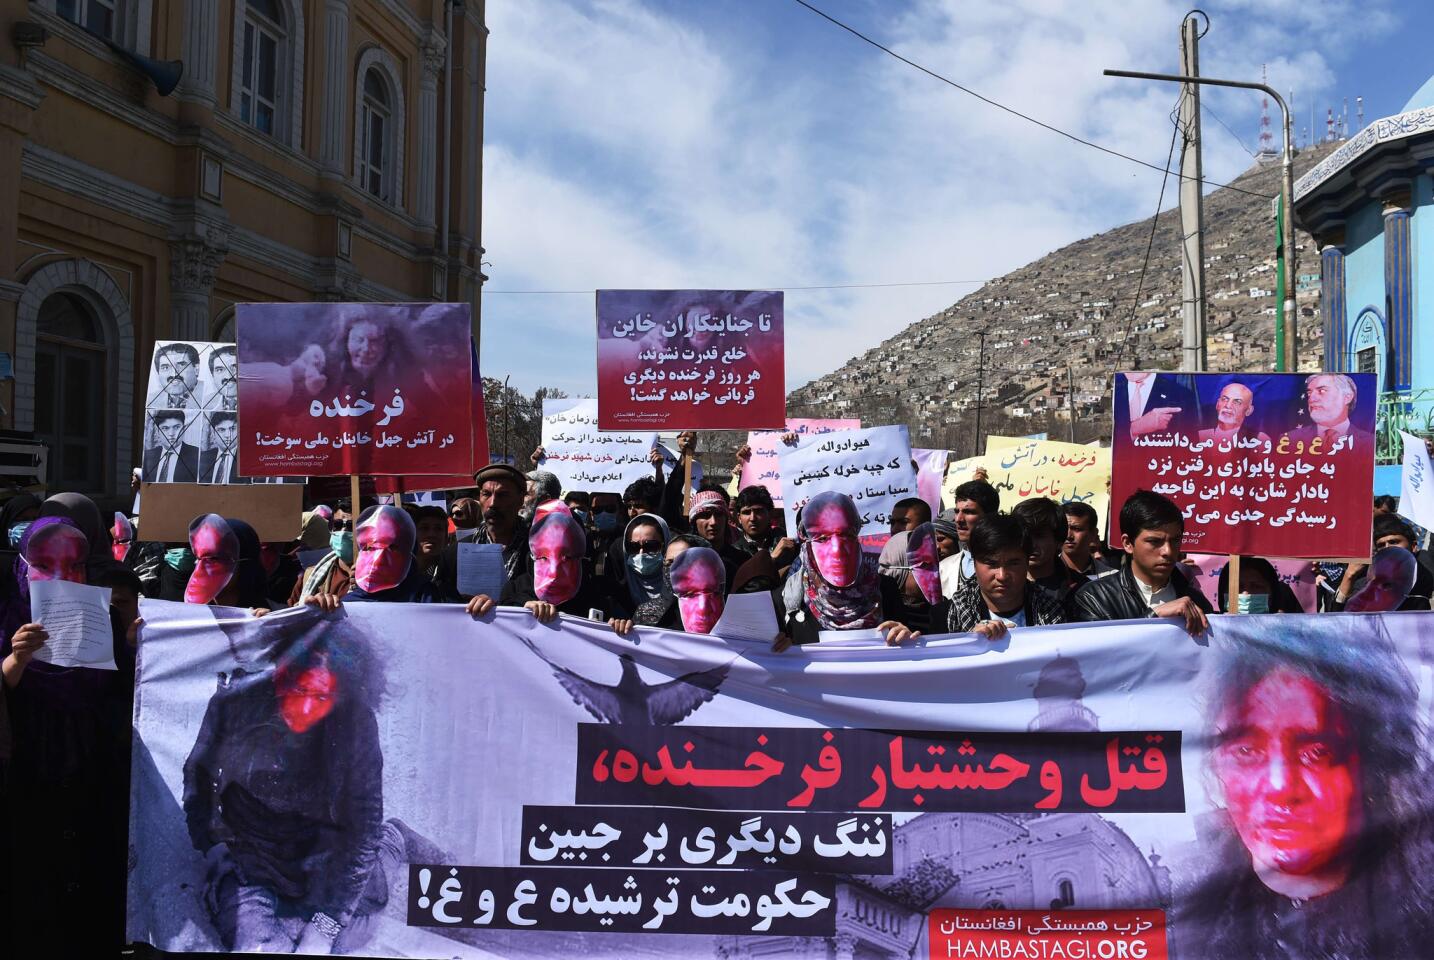 Afghans demand justice for beaten woman